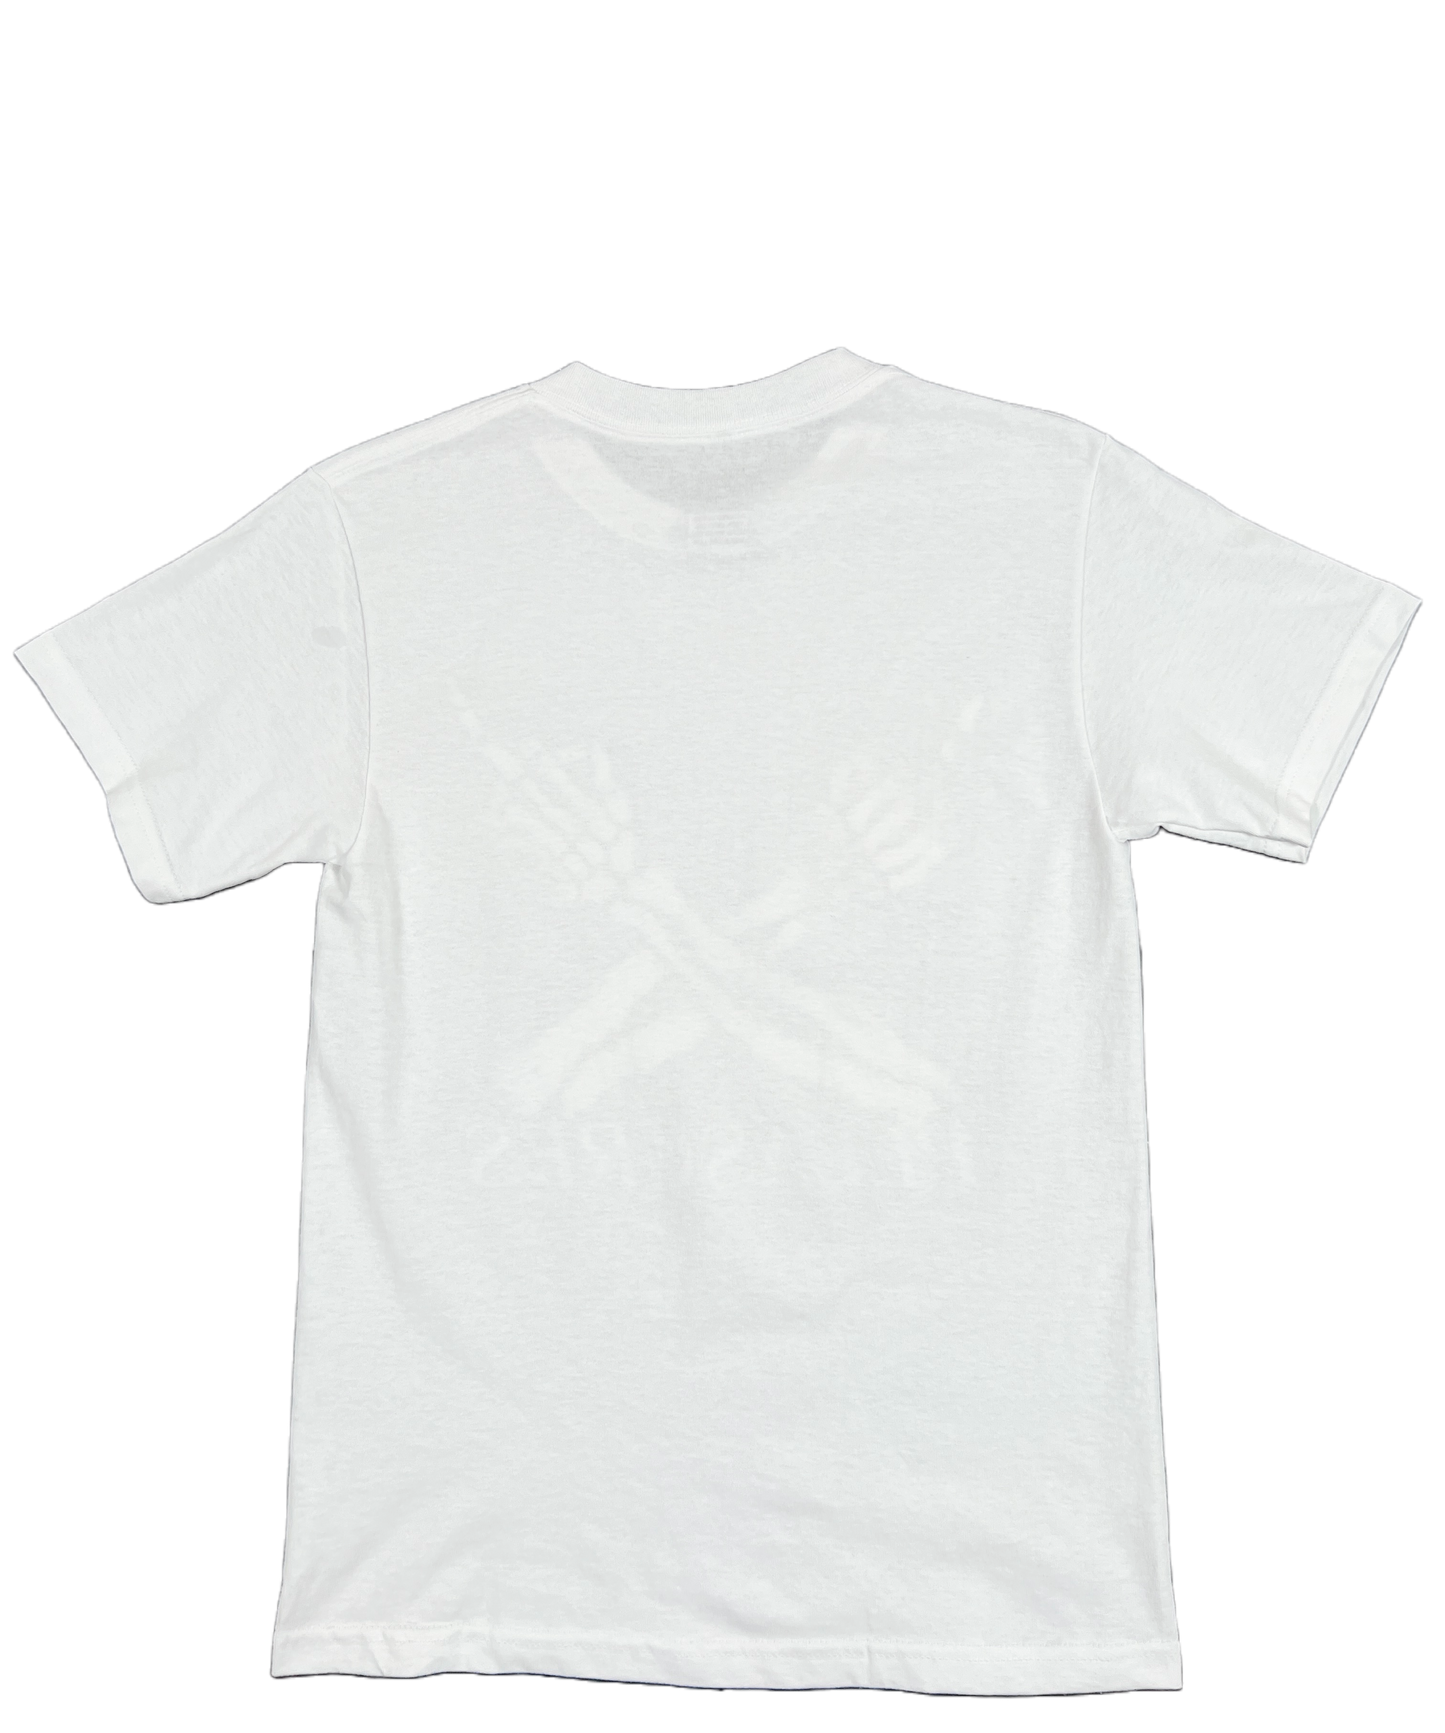 A PLEASURES DON'T CARE T-SHIRT WHITE with a cross graphic on it from PLEASURES.